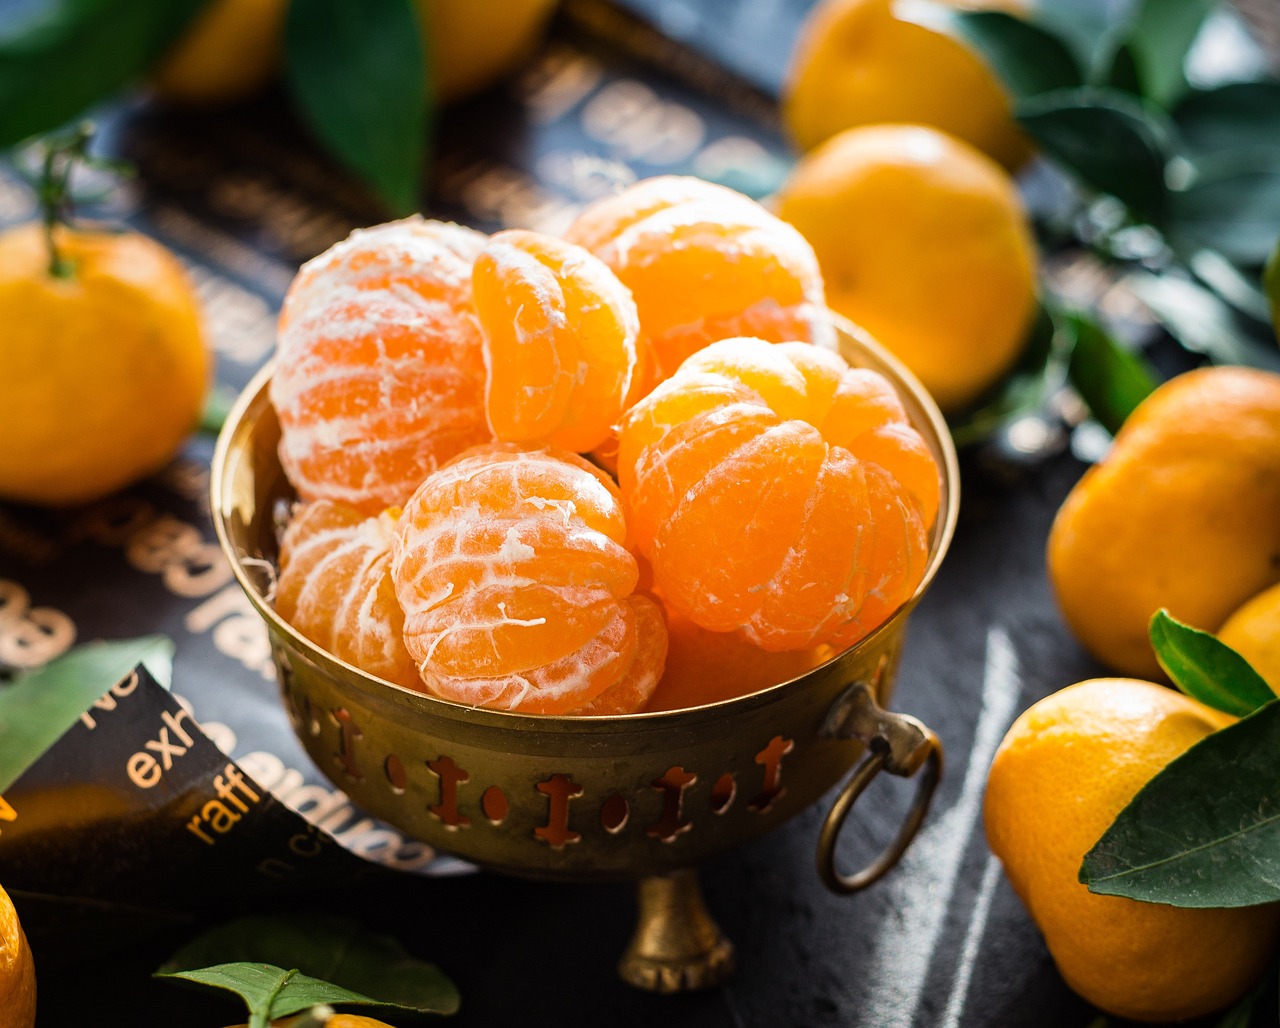 How many oranges a day to lose weight?